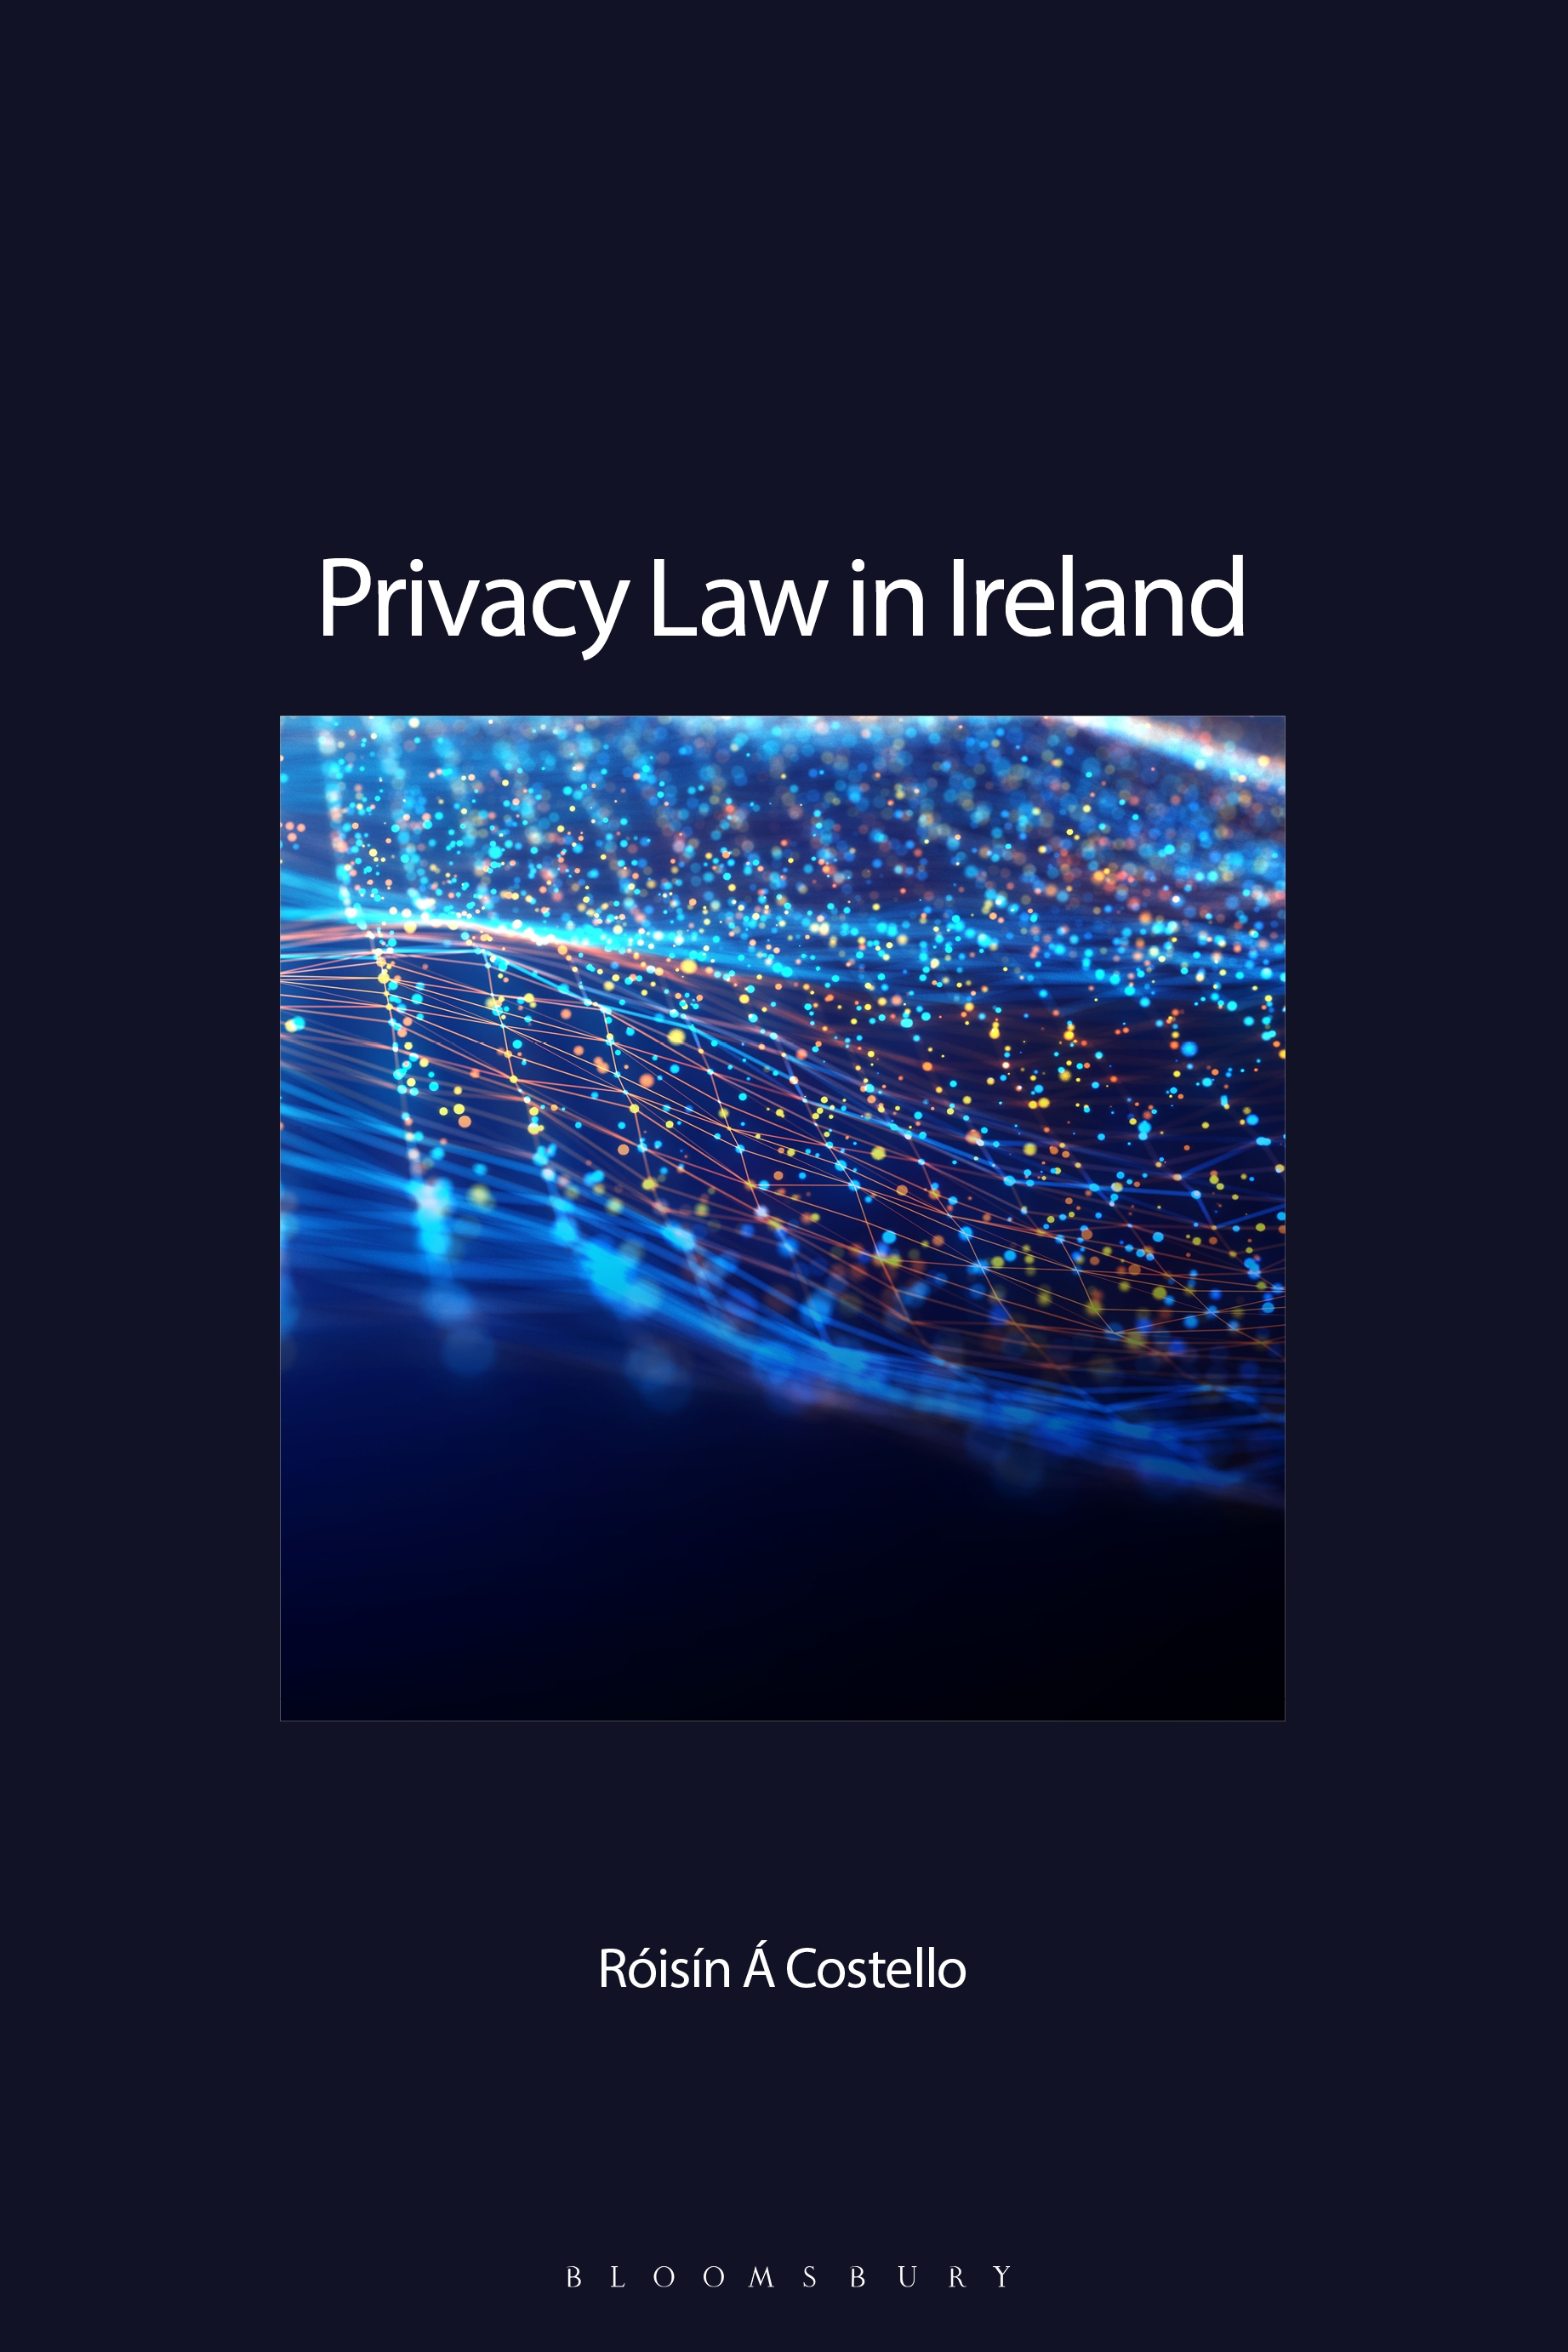 Privacy Law in Ireland book jacket